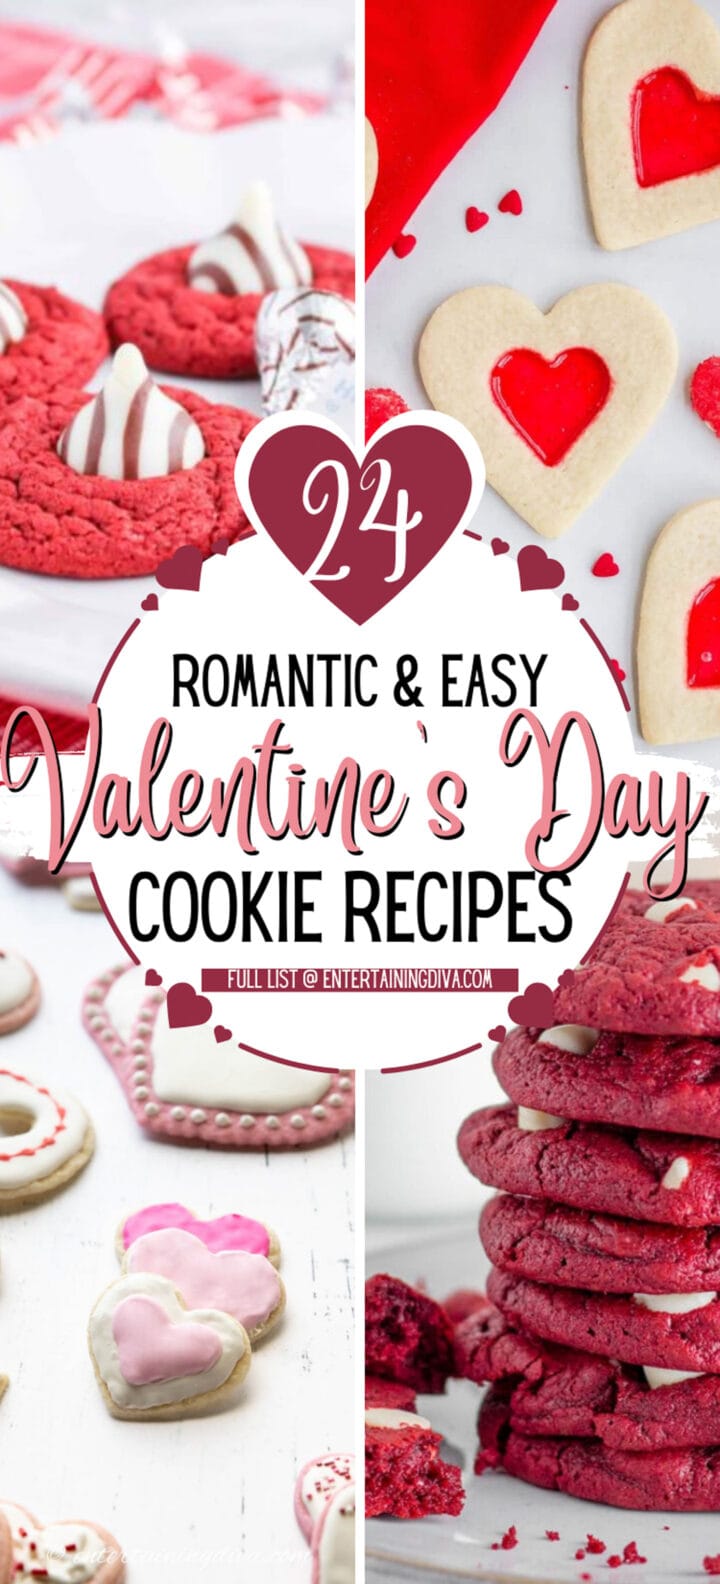 24 of the Best Valentine's Day Cookies Ever!